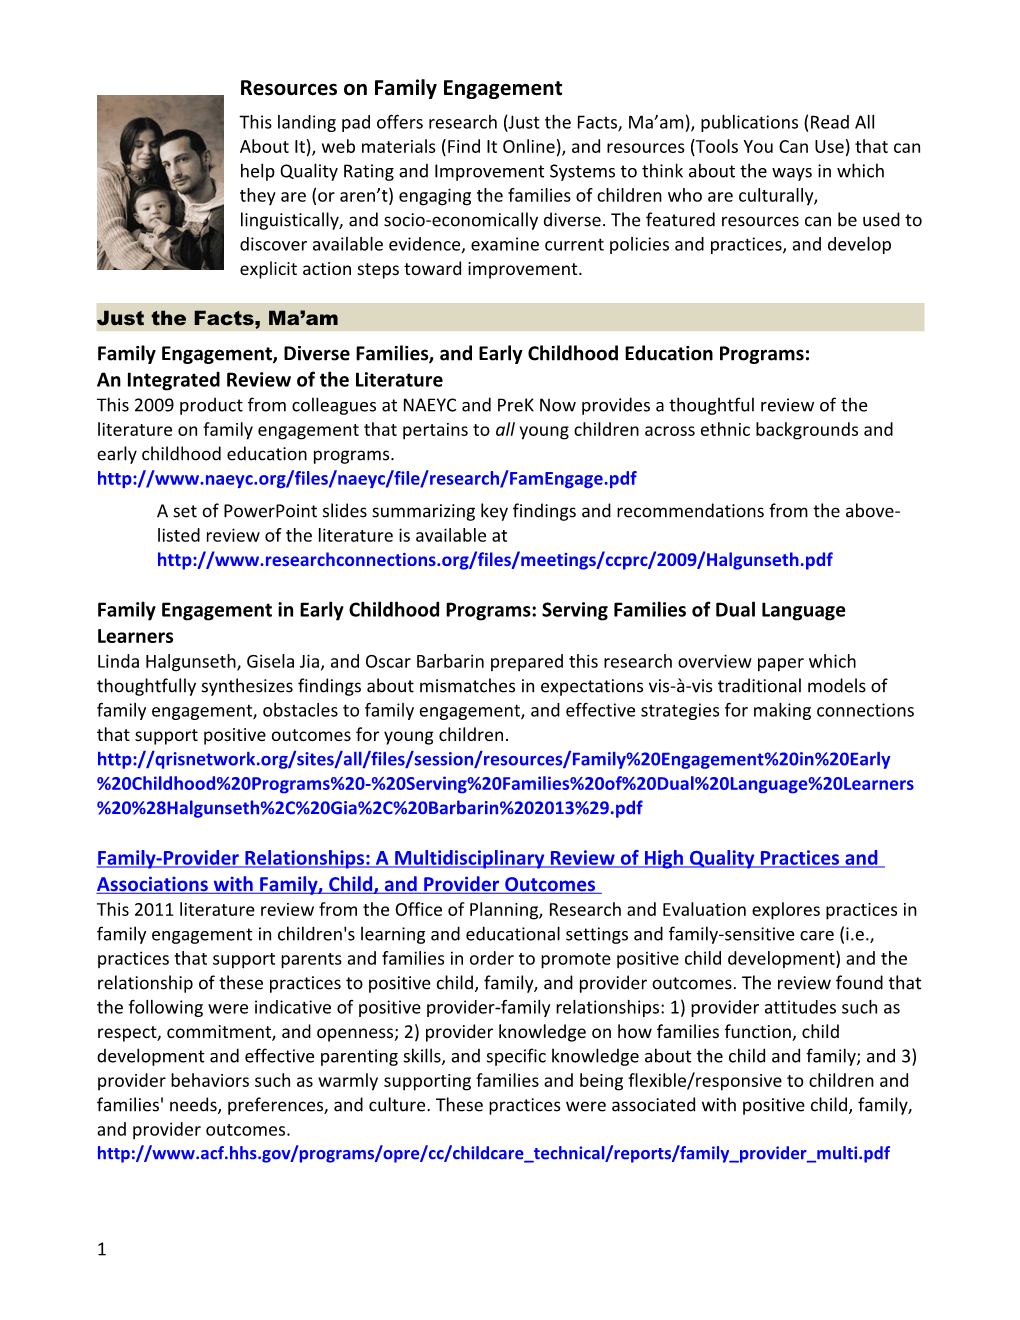 Family Engagement, Diverse Families, and Early Childhood Education Programs